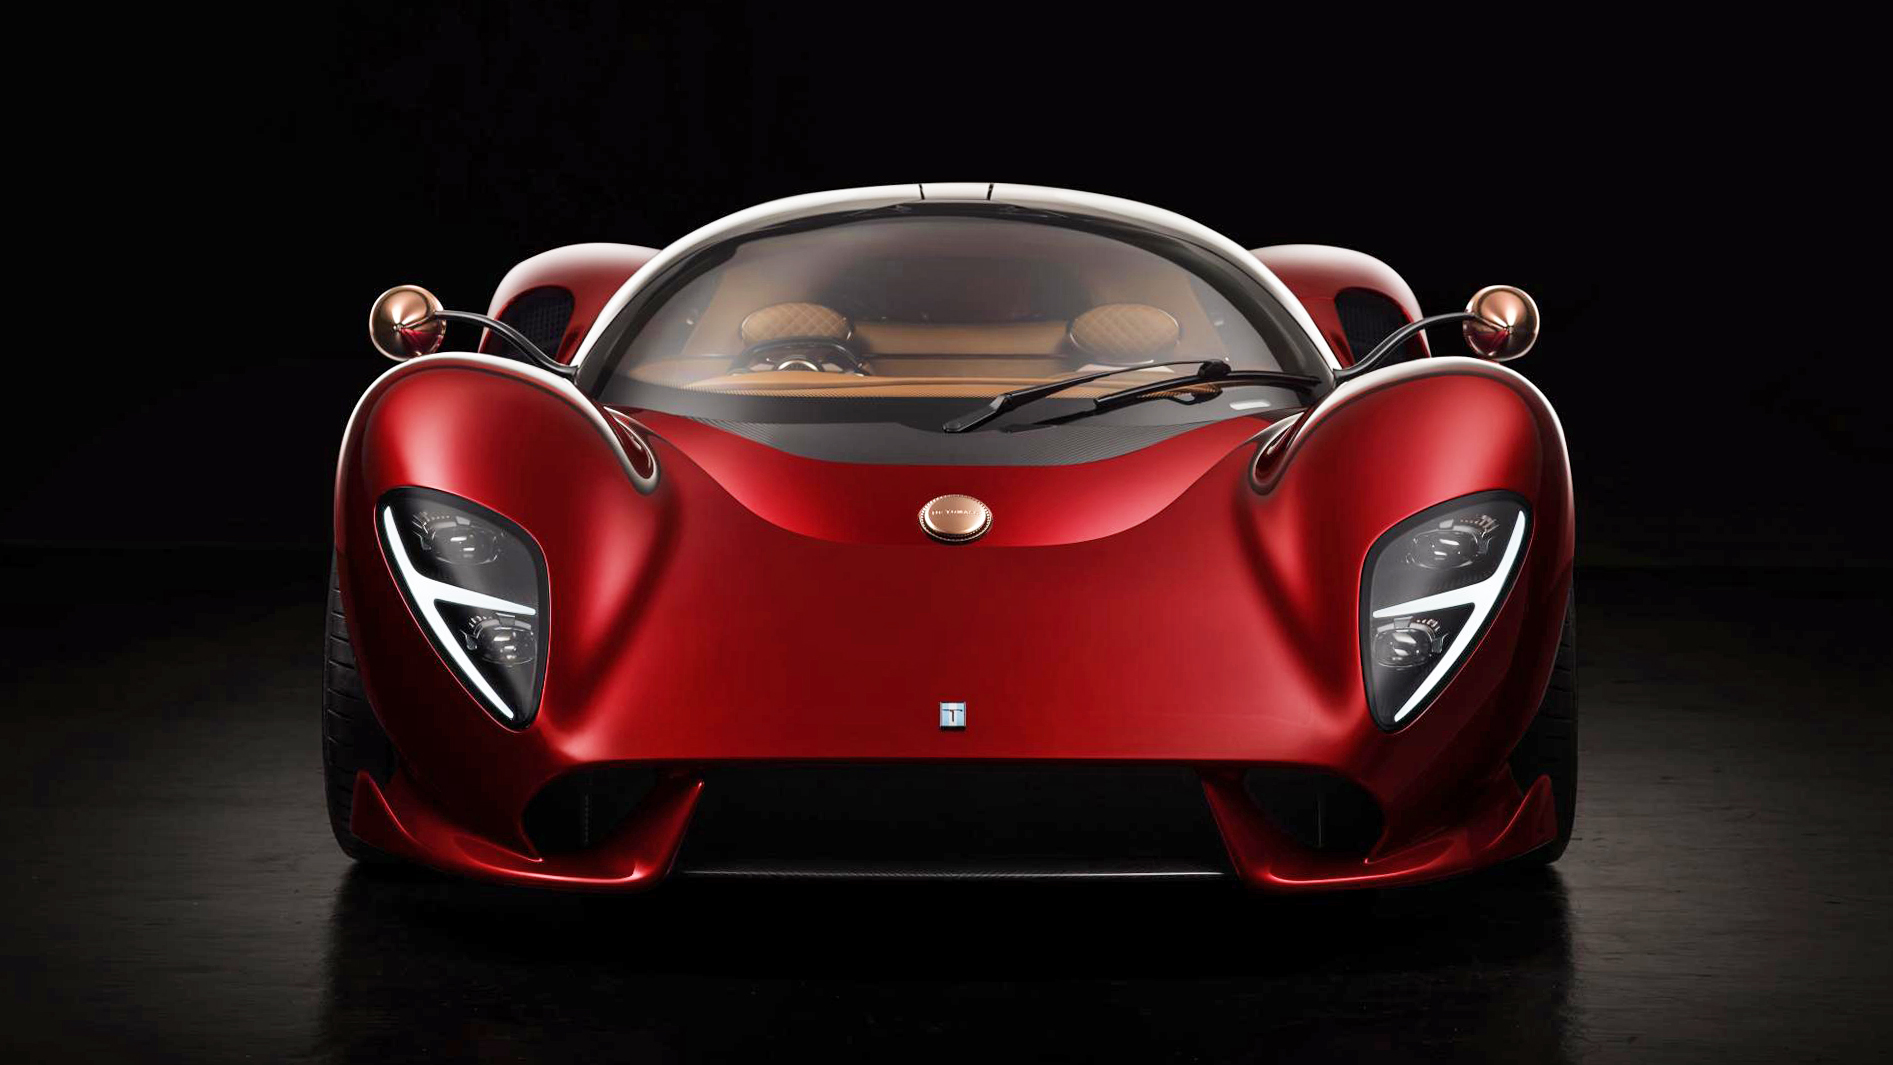 Full frontal image of a red De Tomaso P72 hypercar